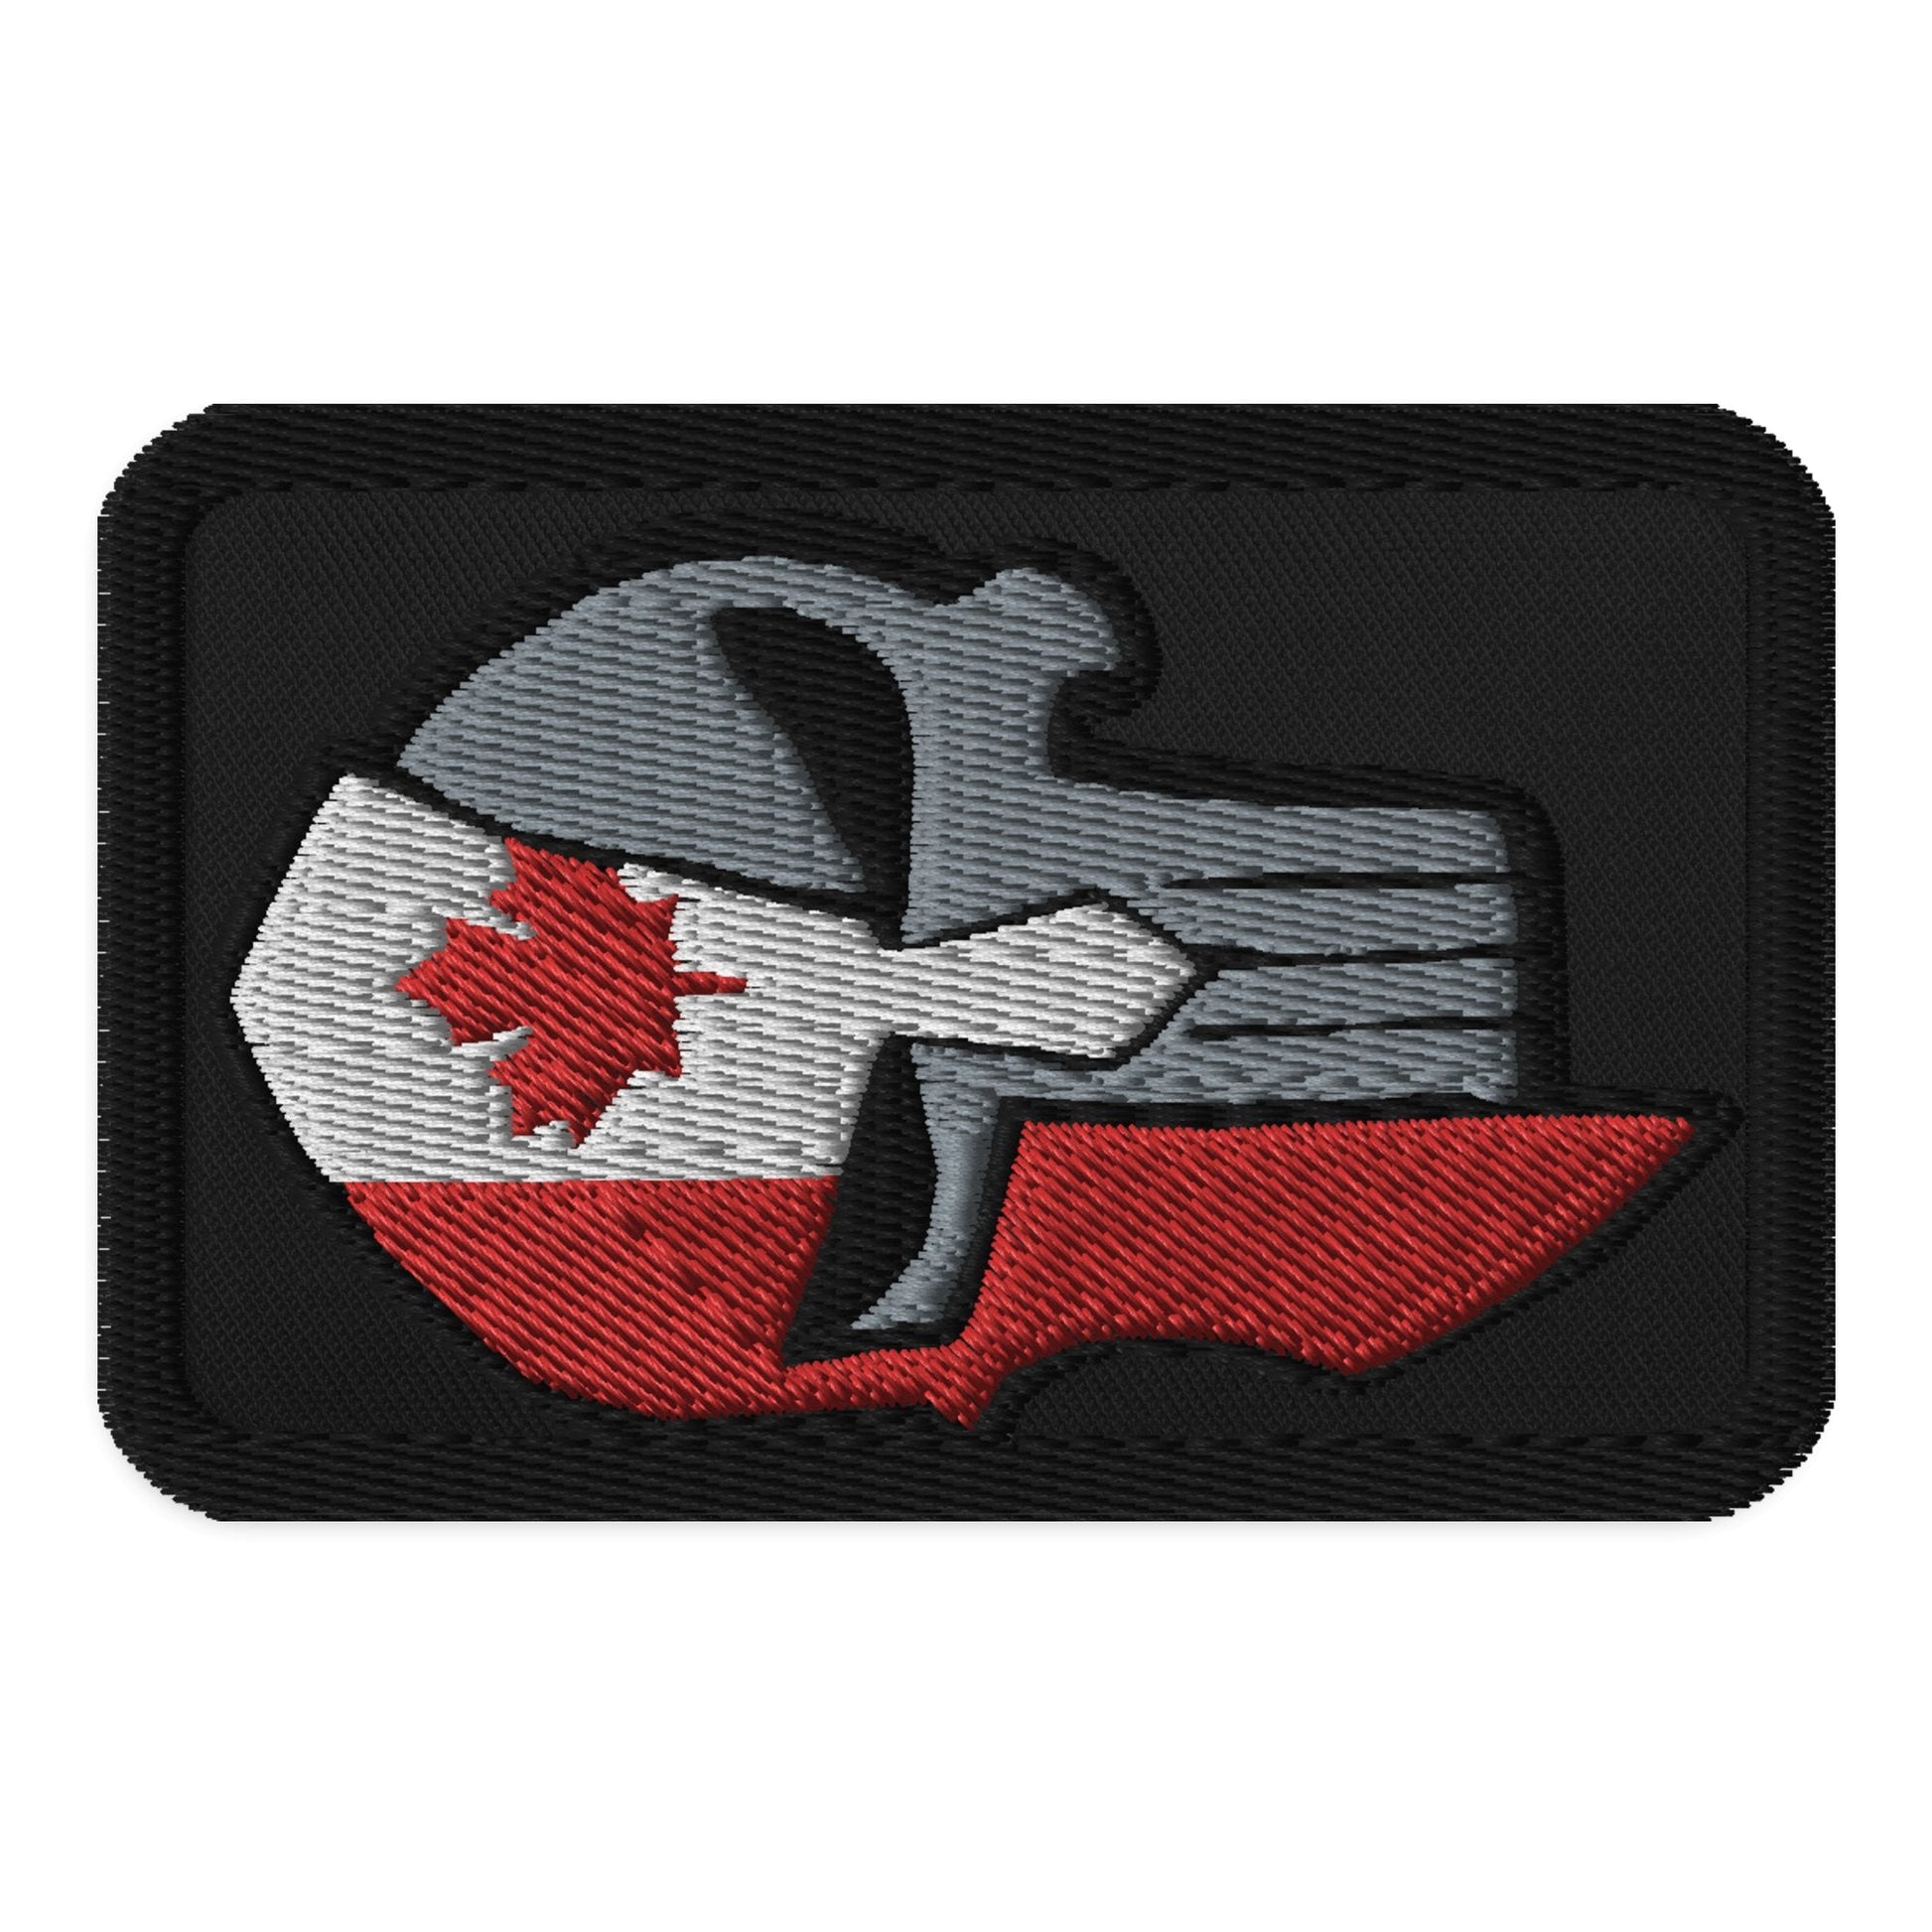 Artsy Patches: Canadian Hoplite - Red Pawn Shop